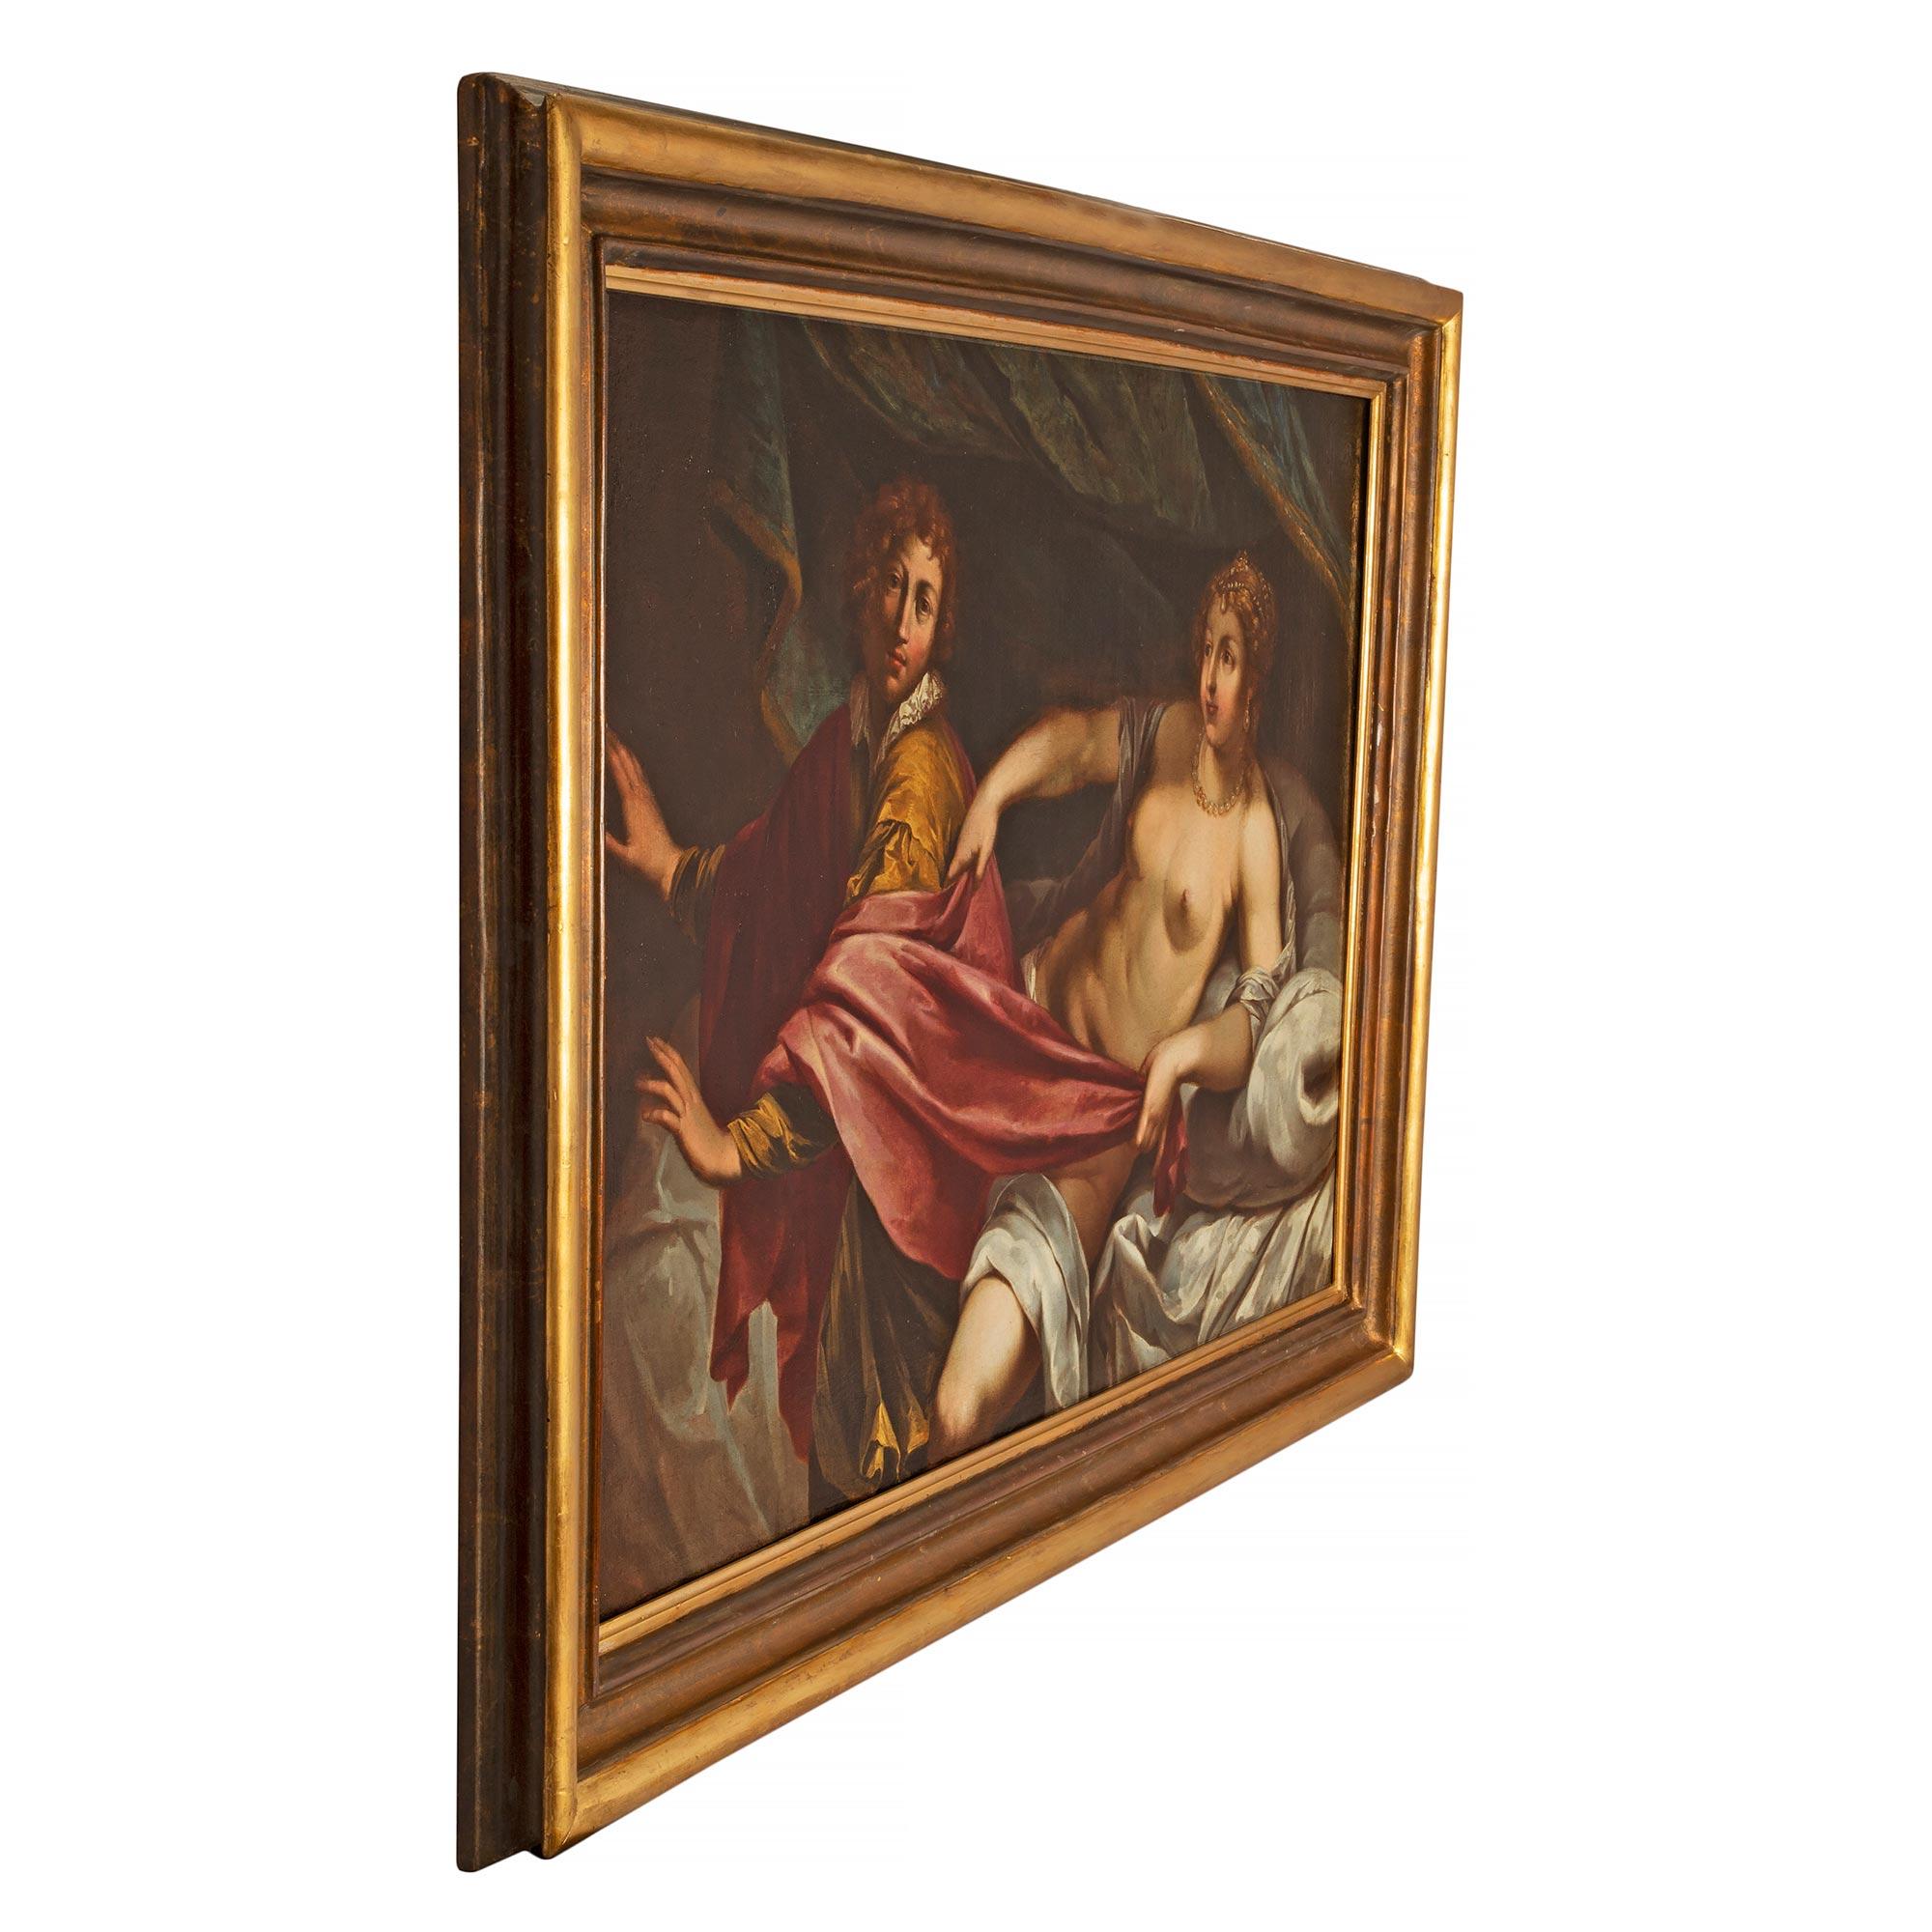 A striking Italian 17th century Venetian st. oil on canvas painting of Joseph fleeing Potiphar's Wife. The painting depicts the classical scene of Potiphar's wife seducing Joseph. As Joseph repelled her attempt to lure him into her bed, she grabbed